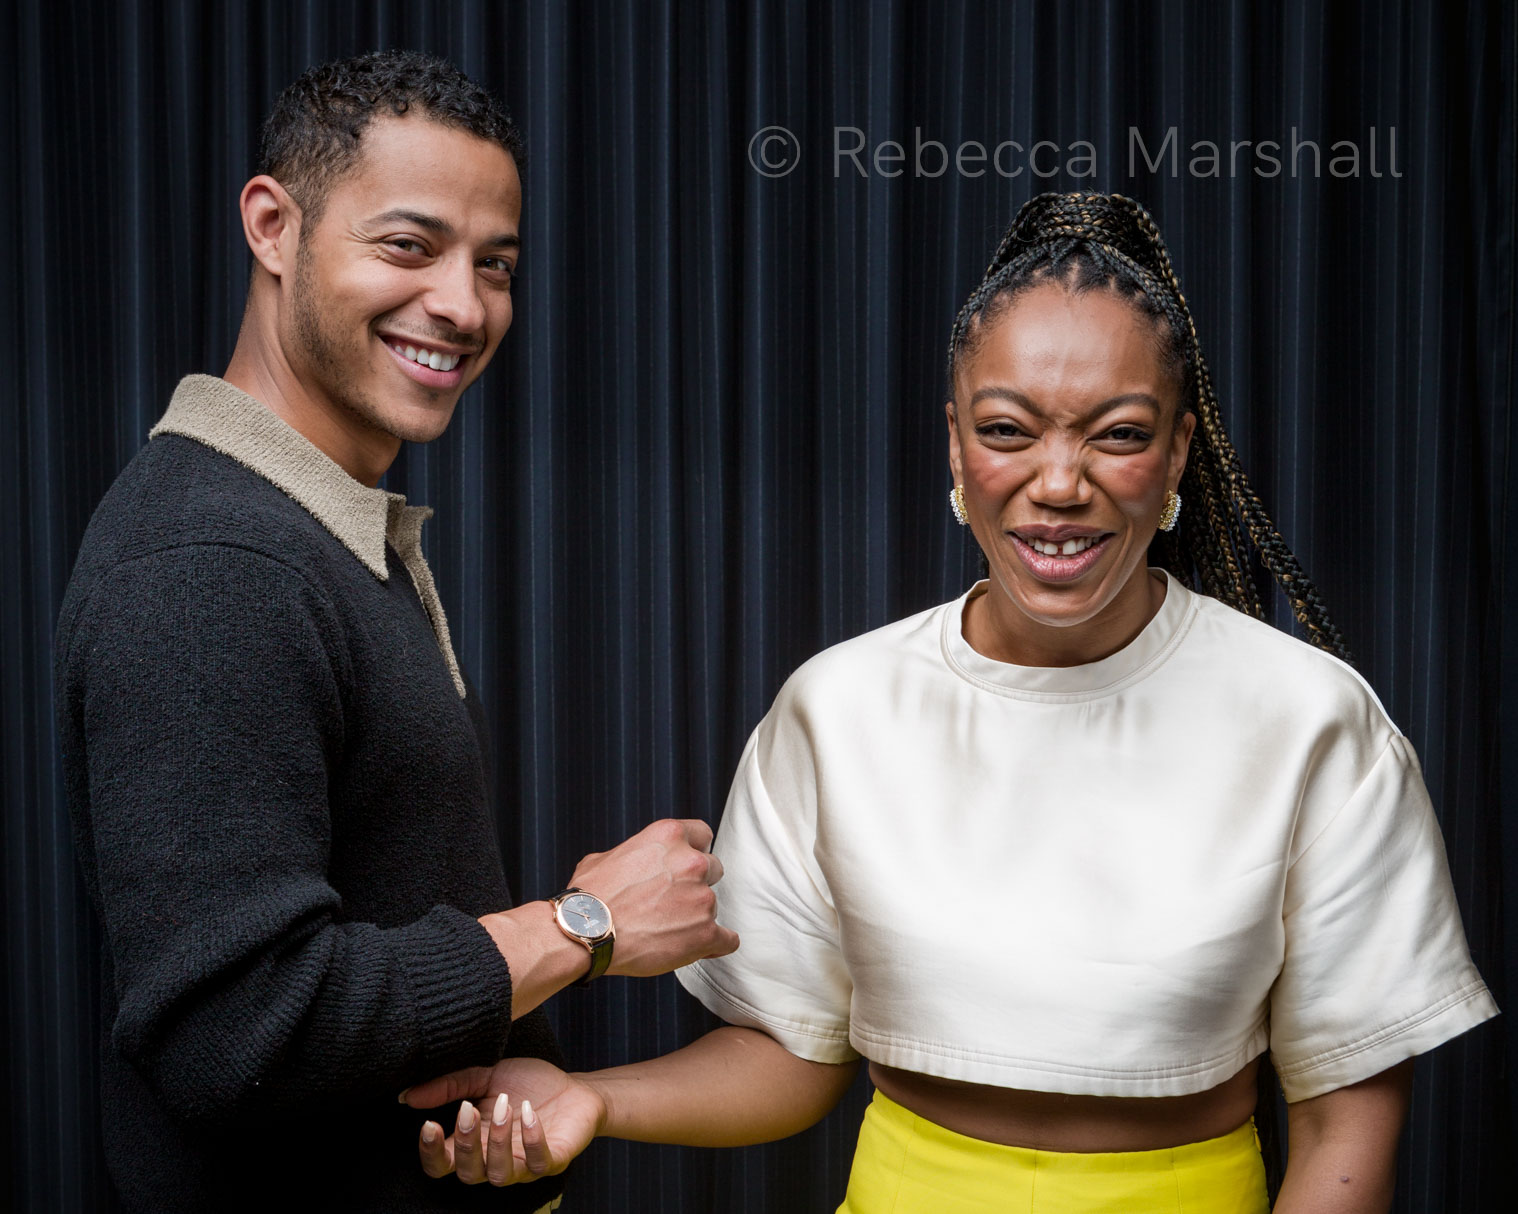 Actors Daryl McCormack and Naomi Ackie laughing in front of a black curtain